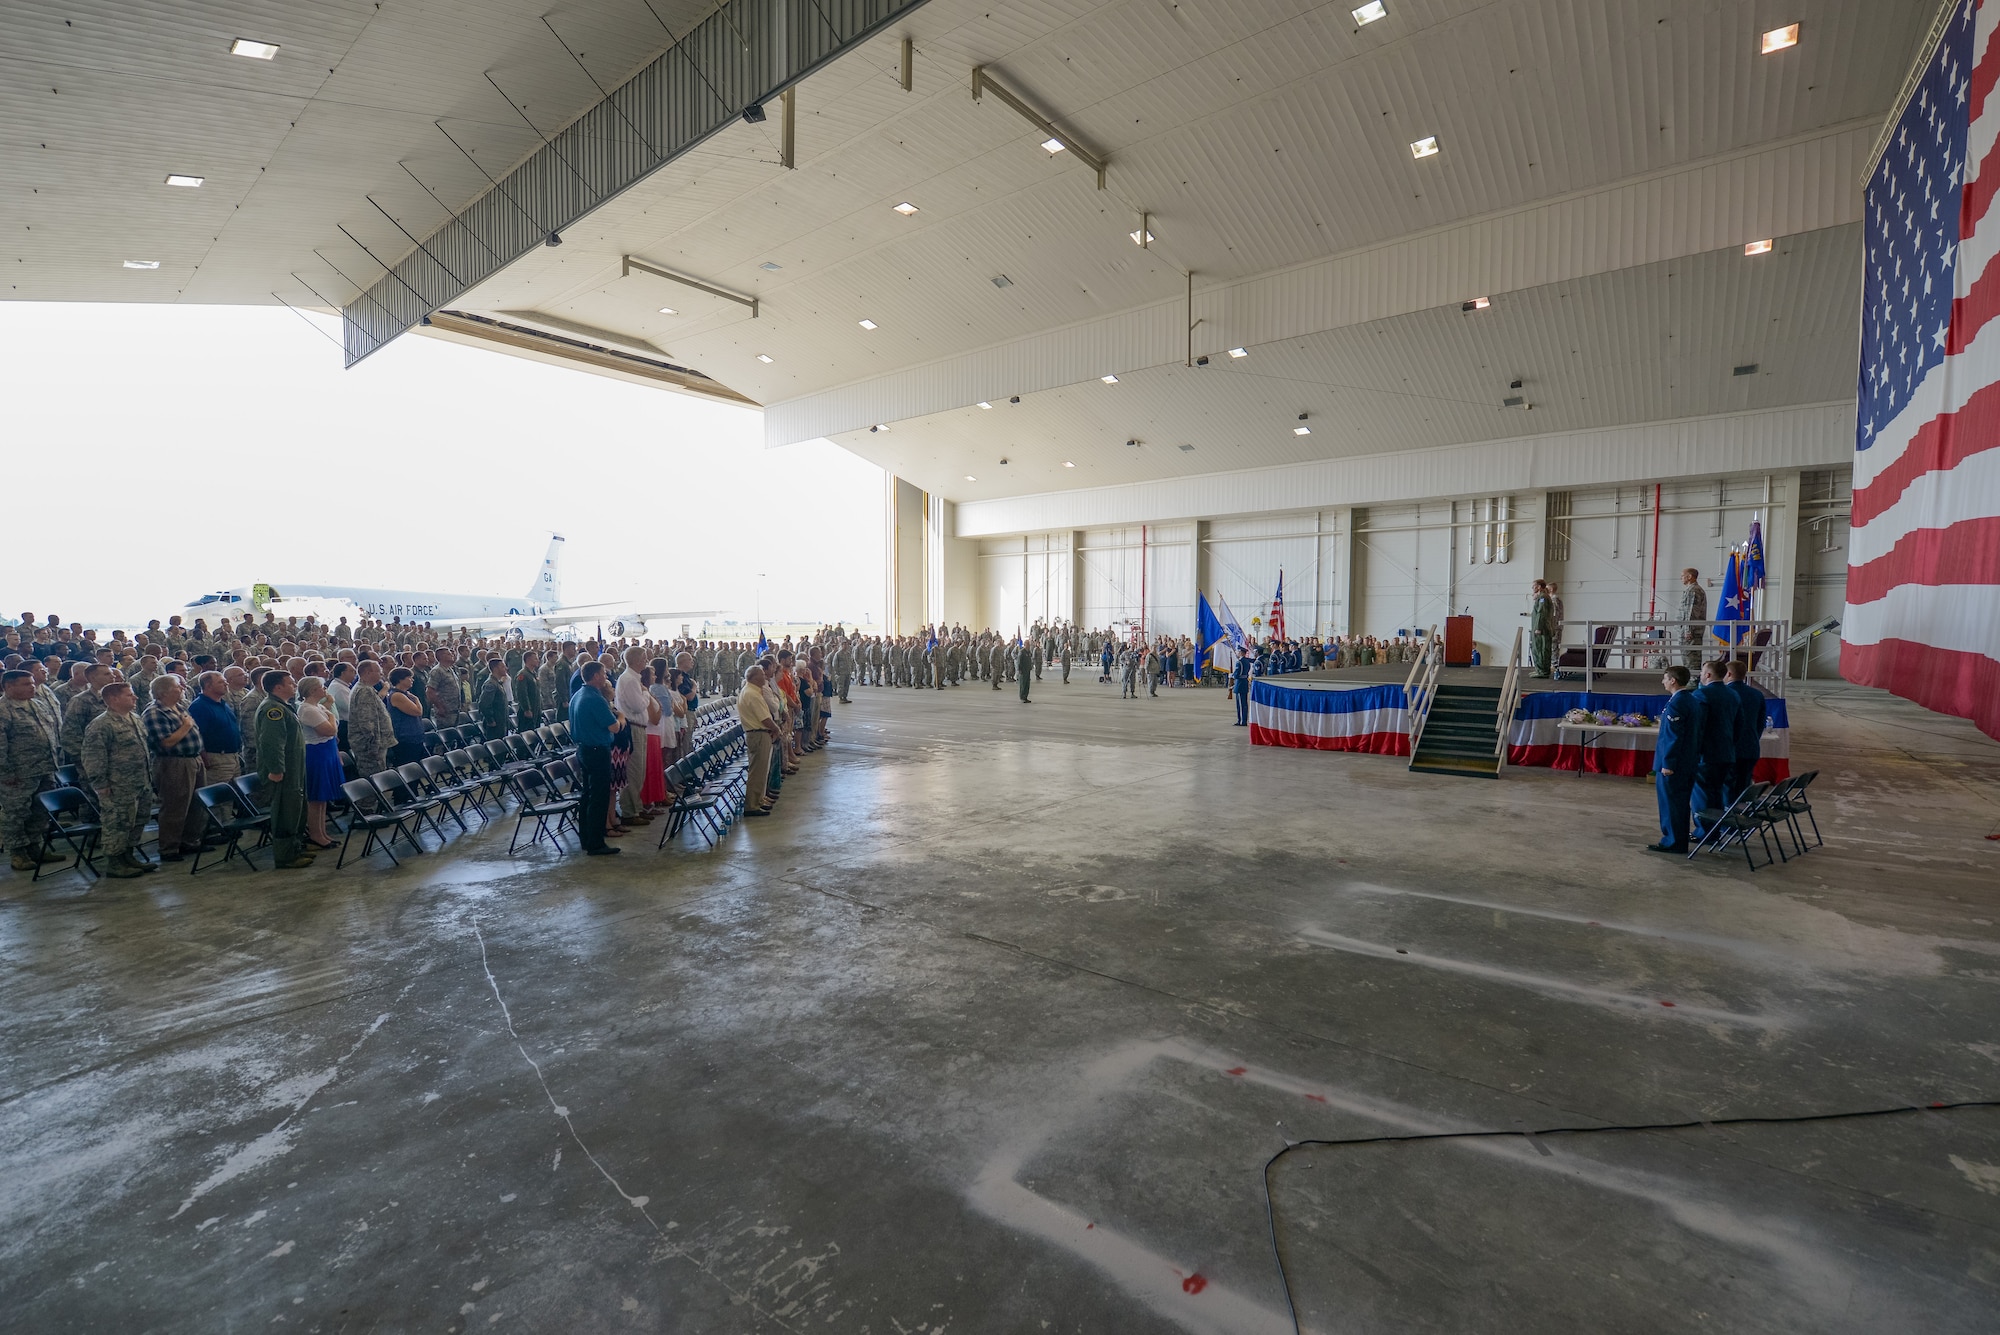 The crowd attending the 116th Air Control Wing (ACW) Change of Command ceremony stands to their feet during the presentation of the colors and singing of the National Anthem at Robins Air Force Base, Ga., July 11, 2015. Col. Mark Weber assumed command of the 116th ACW from Col. Kevin Clotfelter during the ceremony officiated by Brig. Gen. Jesse Simmons Jr., commander, Georgia Air National Guard. The 116th ACW provides manned, joint airborne command and control, battle management, intelligence, surveillance, and reconnaissance support to combatant commanders around the globe flying the E-8C Joint STARS aircraft. (U.S. Air National Guard photo by Senior Master Sgt. Roger Parsons/Released)